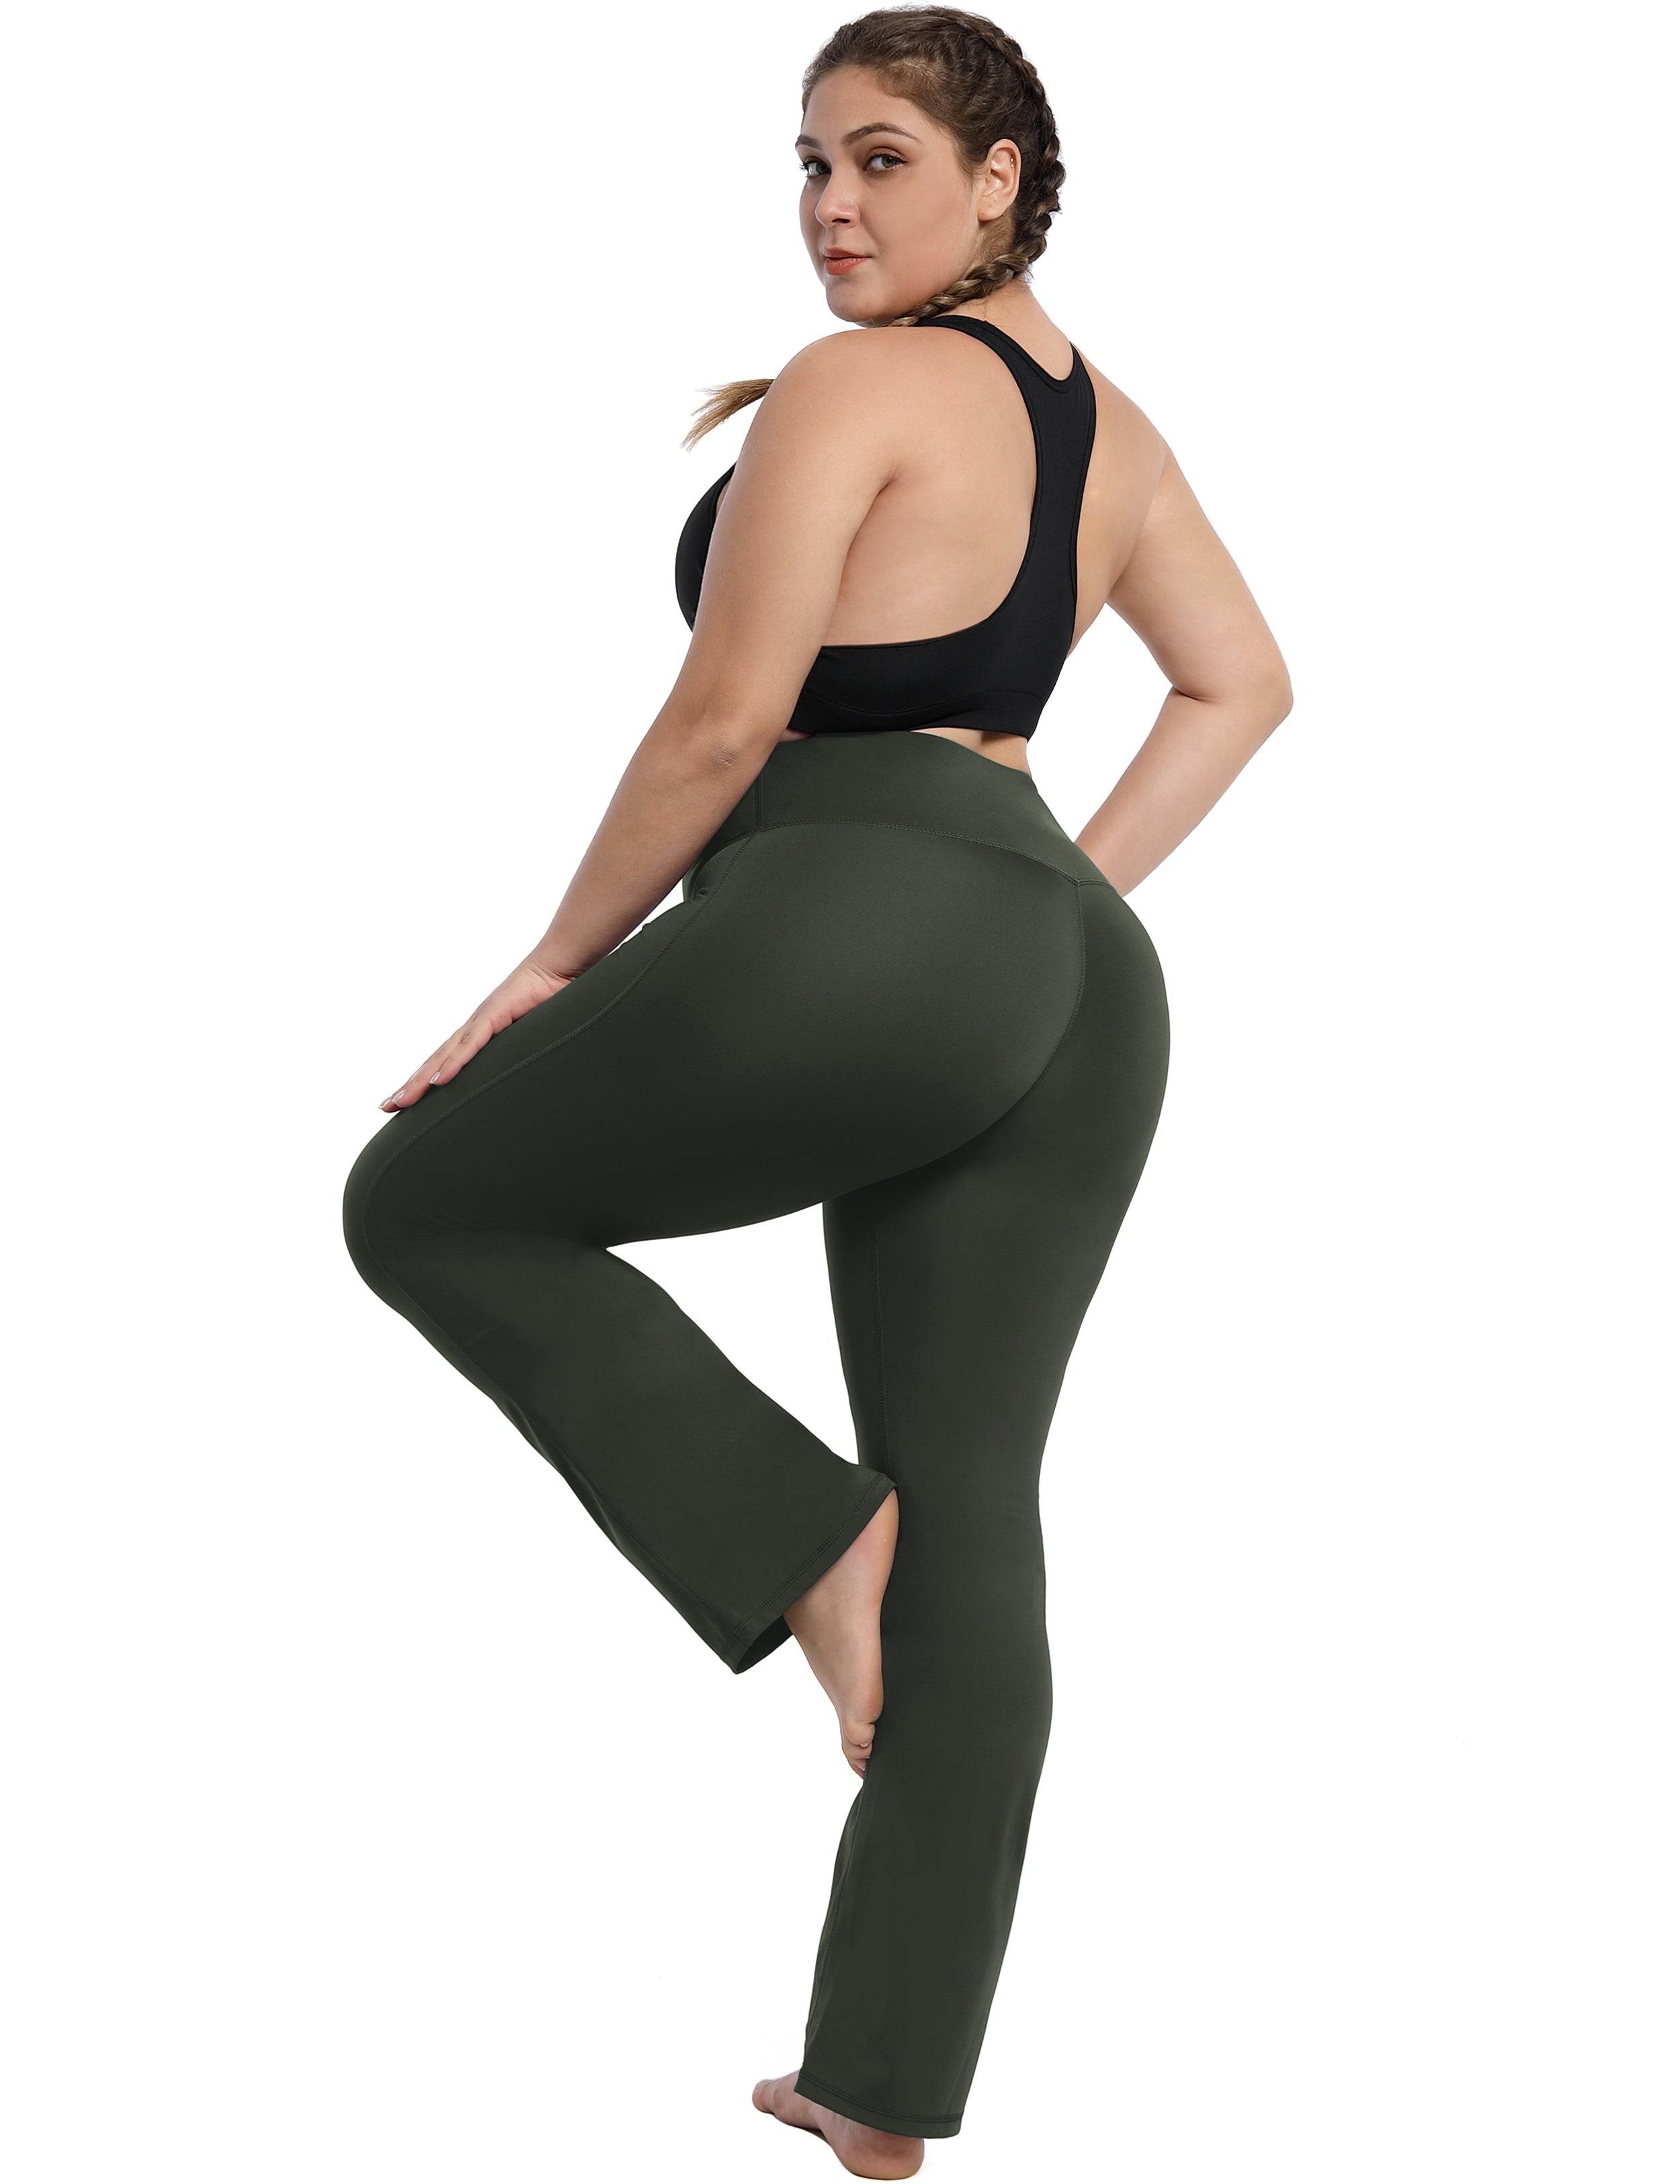 High Waist Bootcut Leggings Olivegray 75%Nylon/25%Spandex Fabric doesn't attract lint easily 4-way stretch No see-through Moisture-wicking Tummy control Inner pocket Five lengths